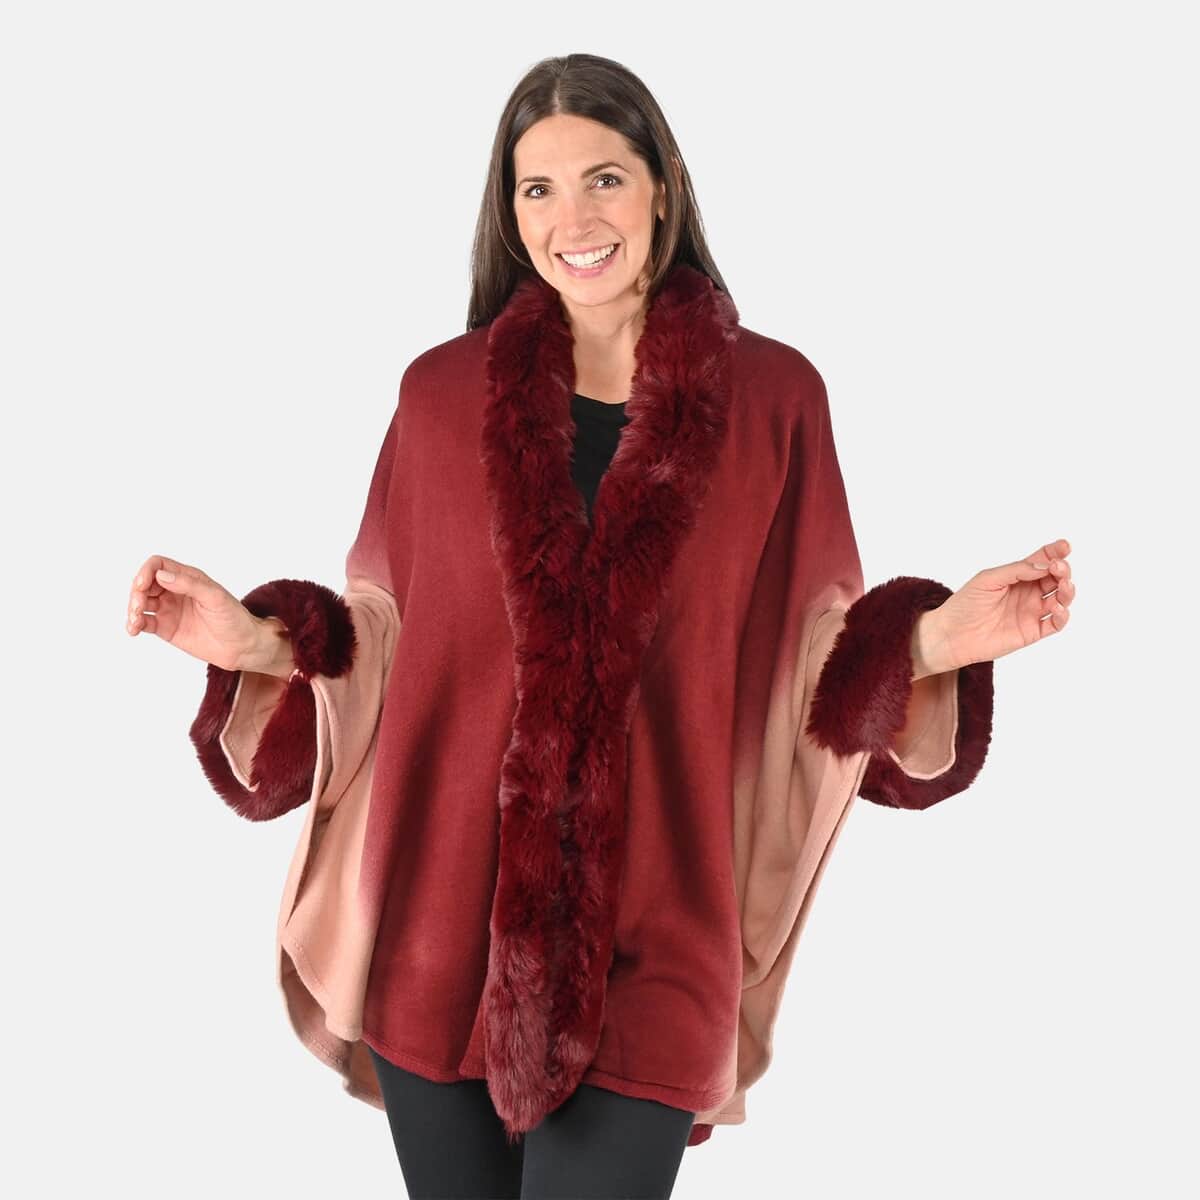 Tamsy Burgundy Ombre Cape with Faux Fur Trim - One Size Fits Most image number 3